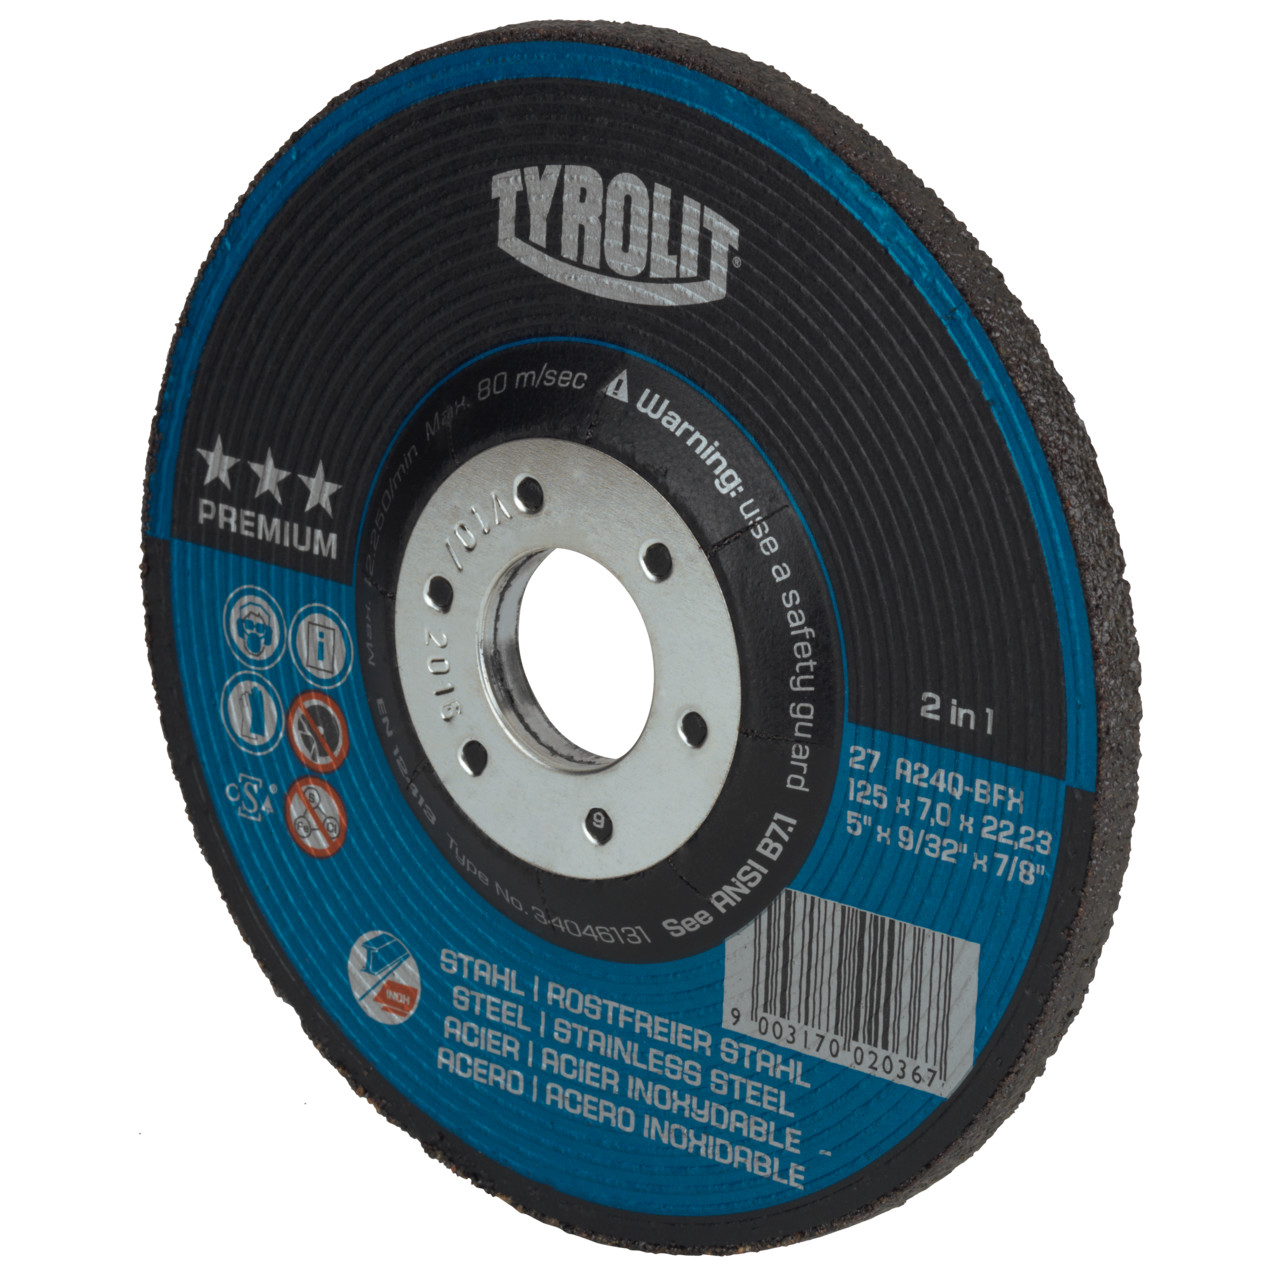 TYROLIT grinding wheel DxUxH 178x7x22.23 2in1 for steel and stainless steel, shape: 27 - offset version, Art. 34046133